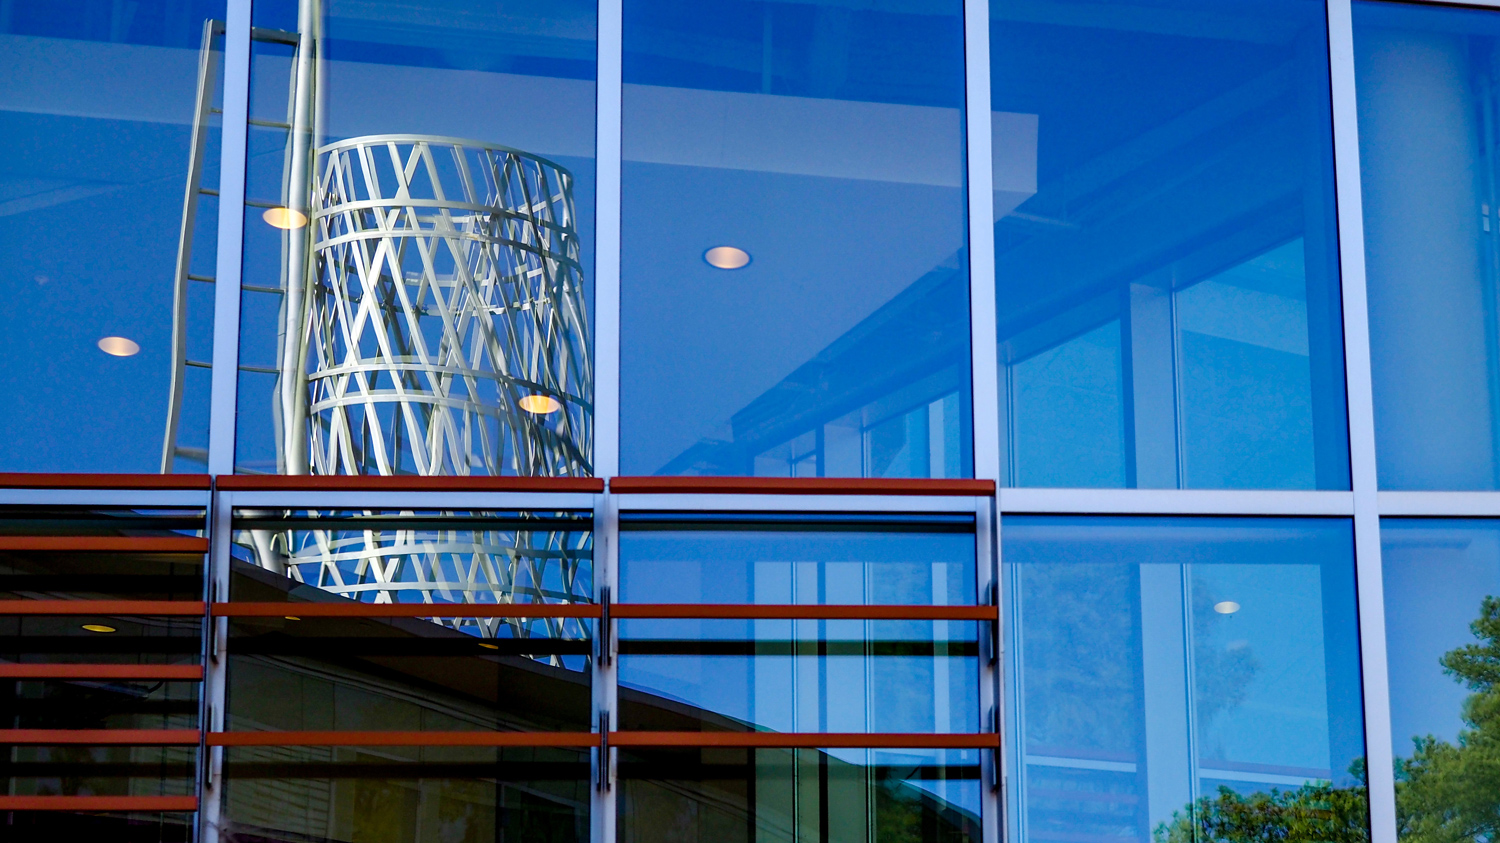 Reflection of the Talley Technology Tower